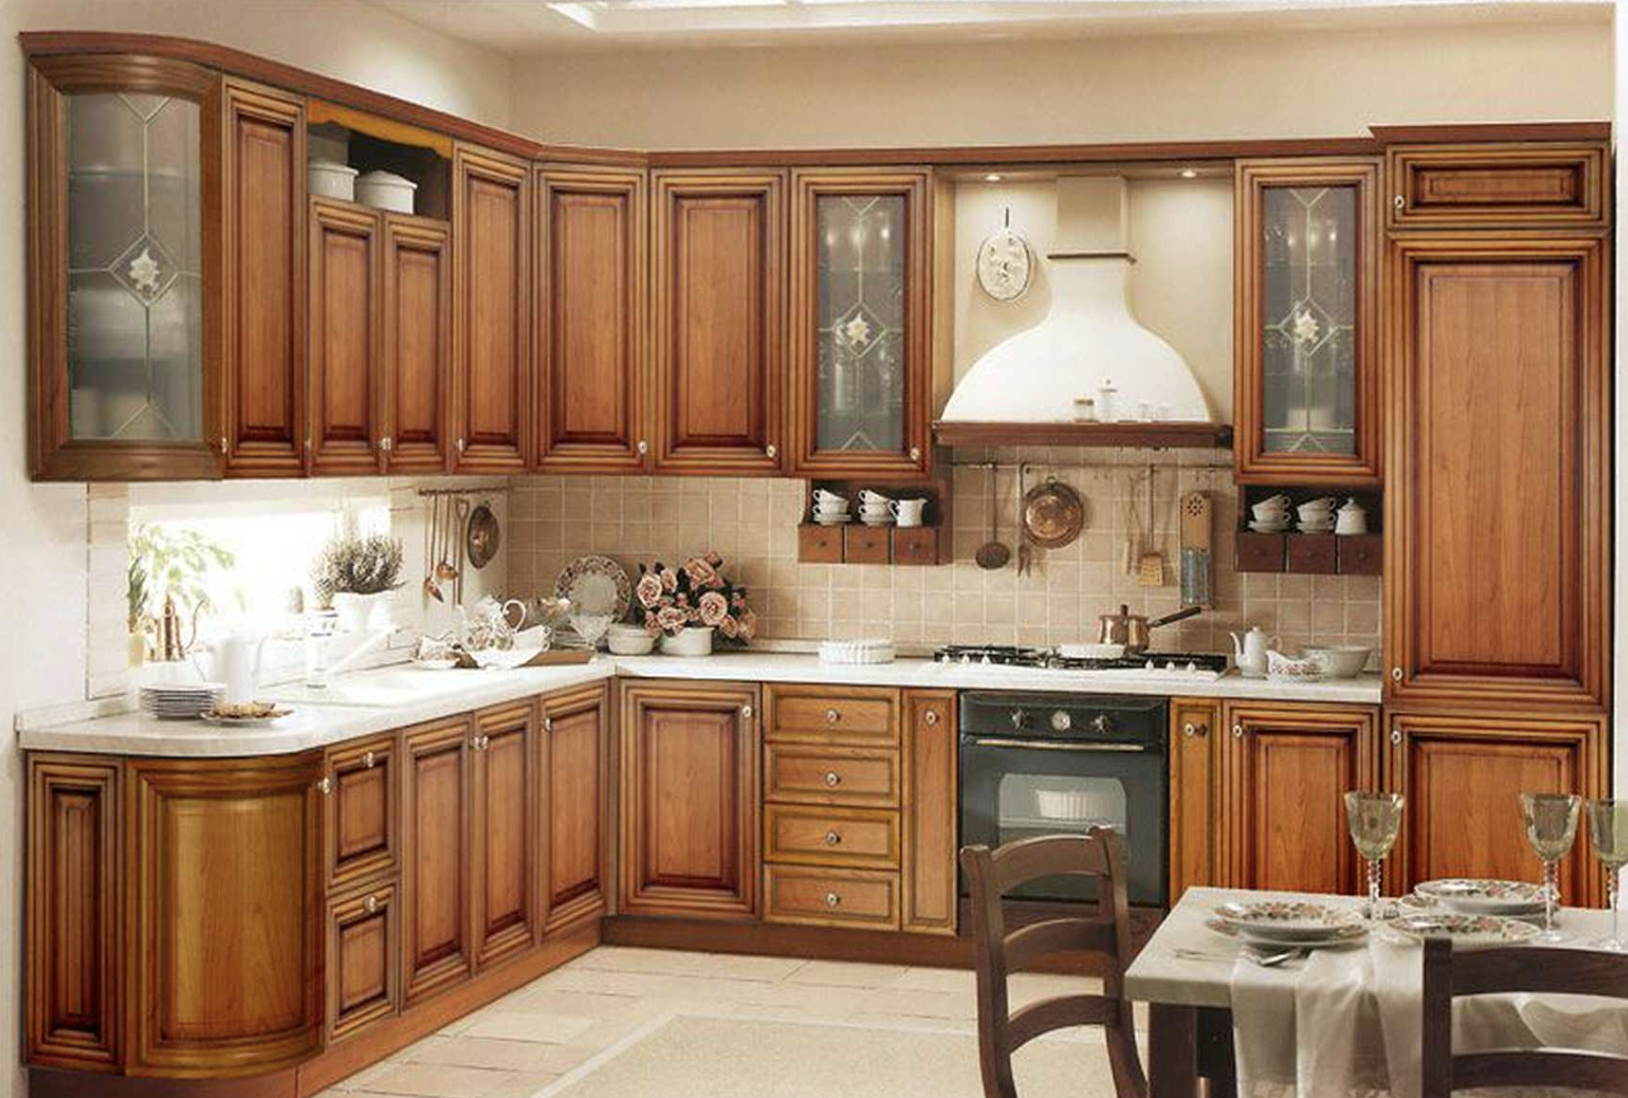 6 Kitchen Cabinet Options For A Design